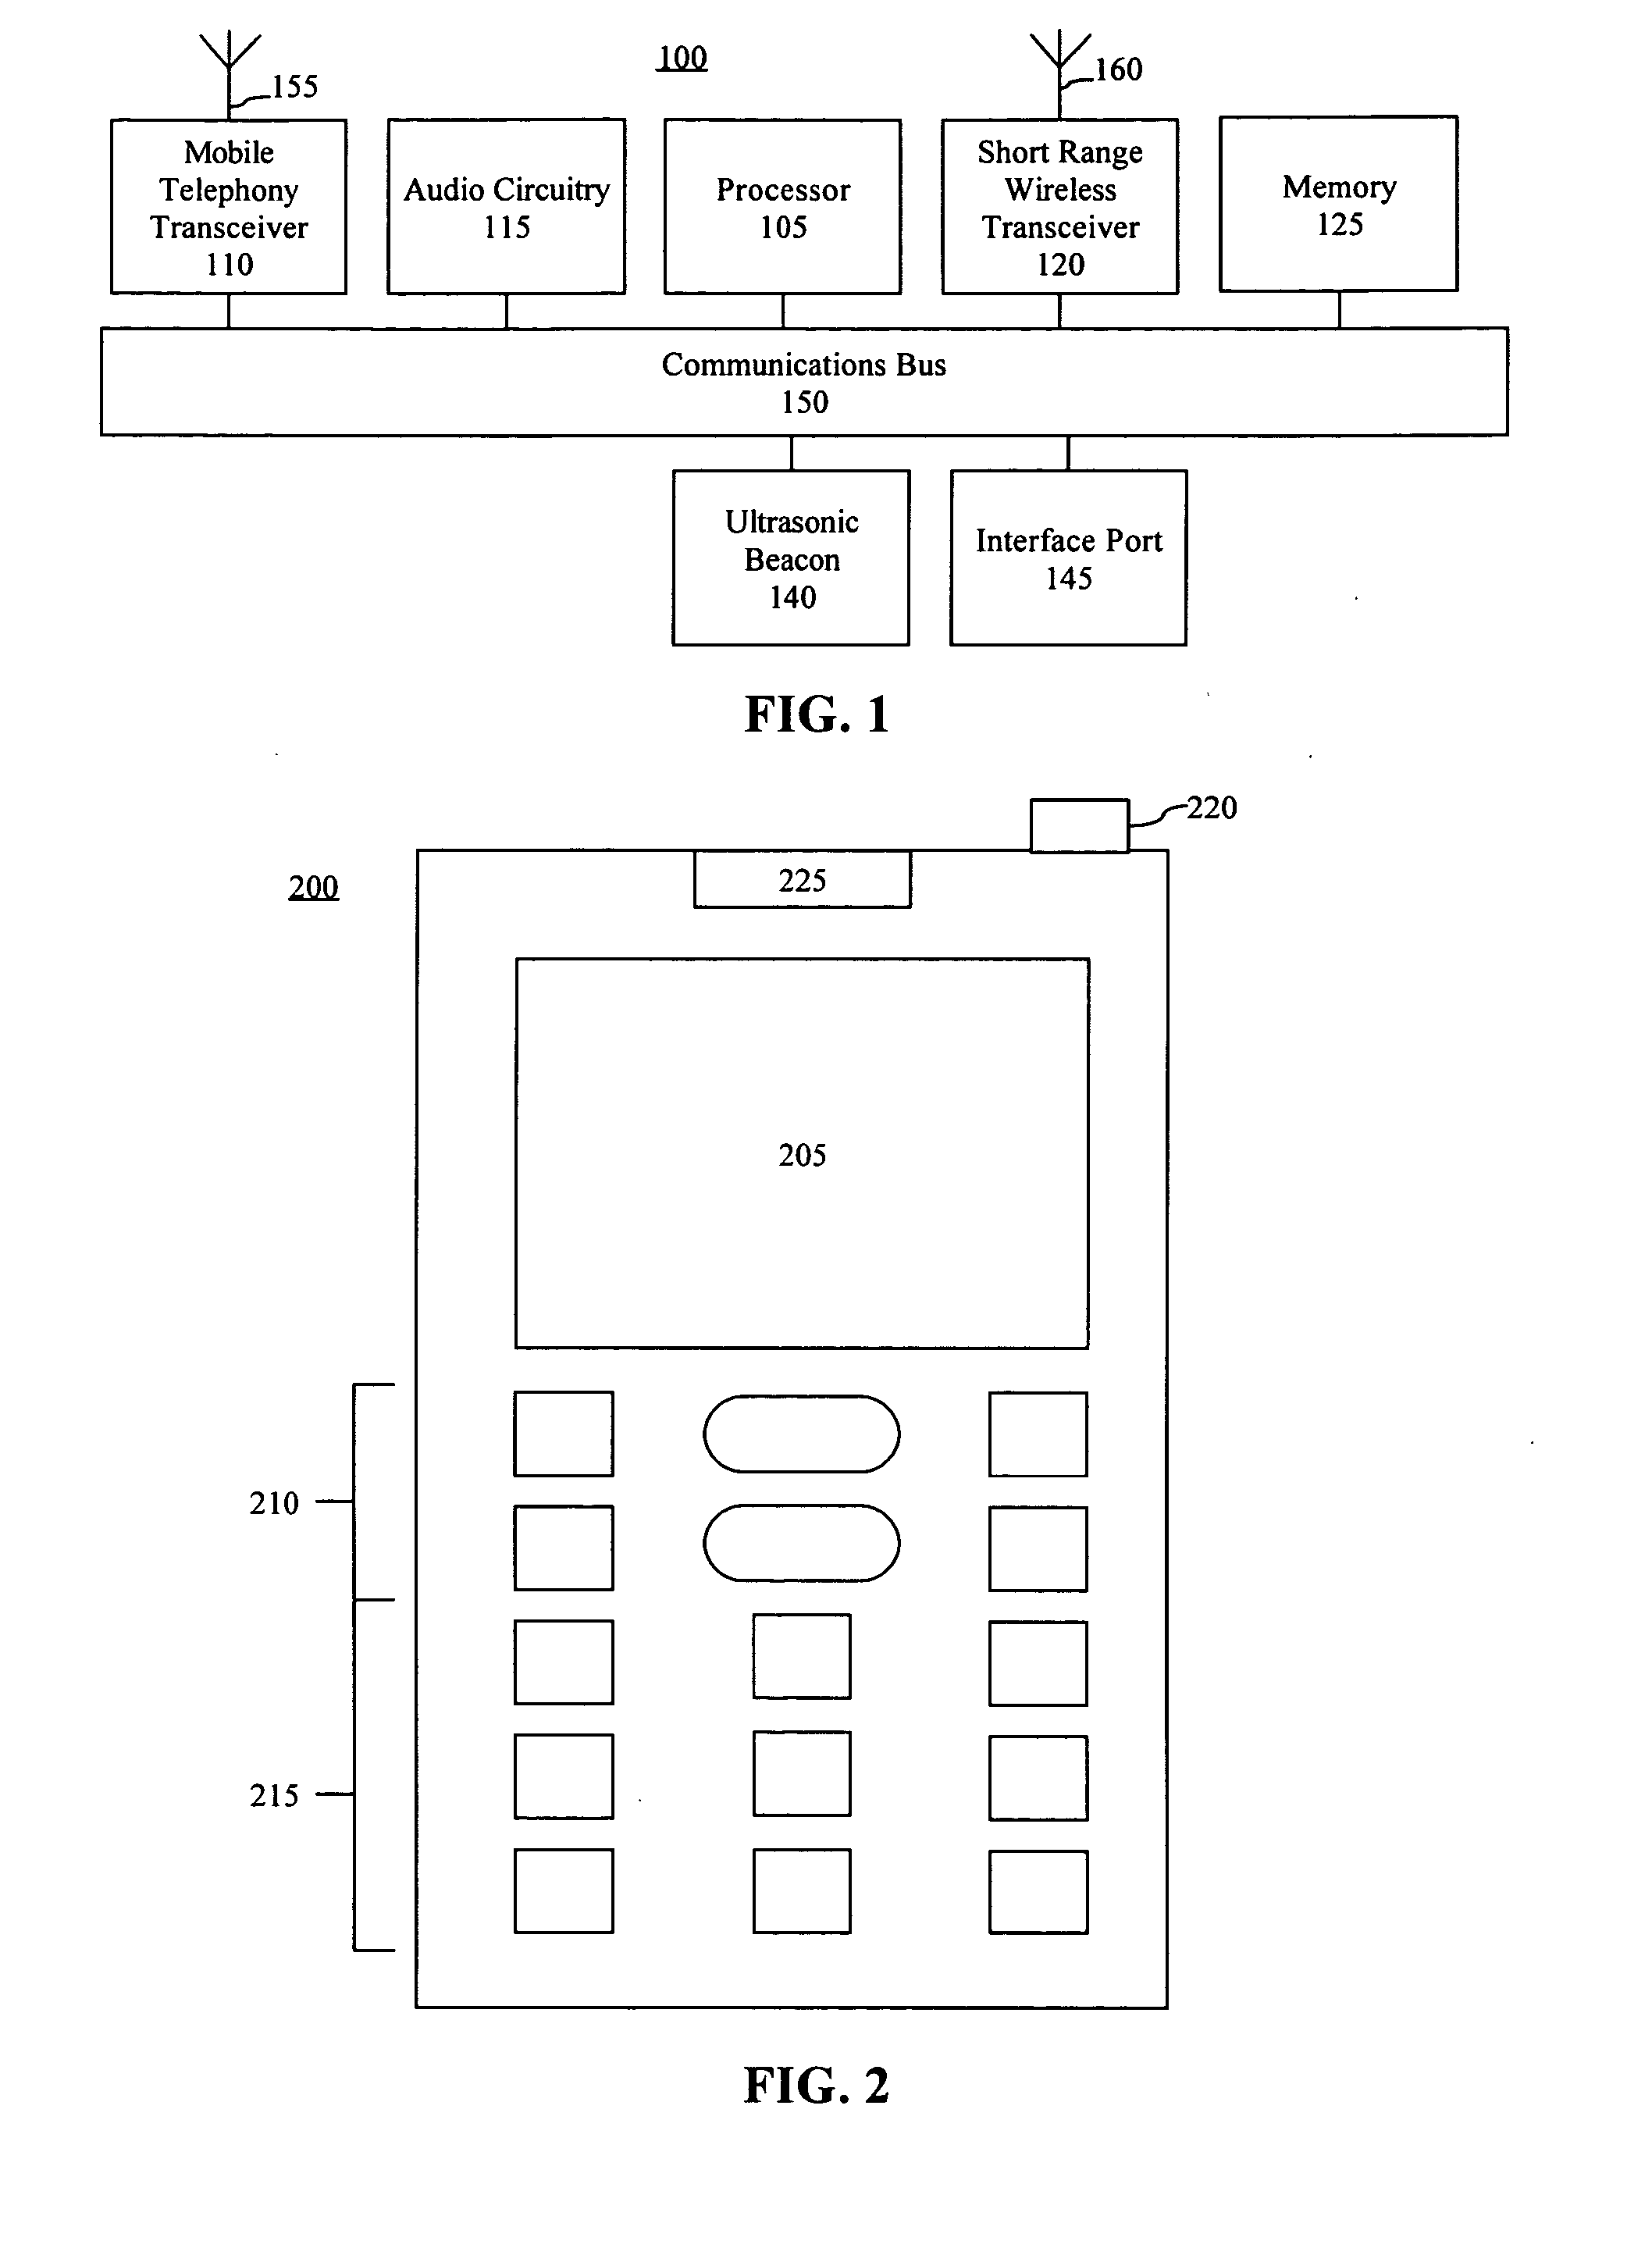 Daily task and memory assistance using a mobile device